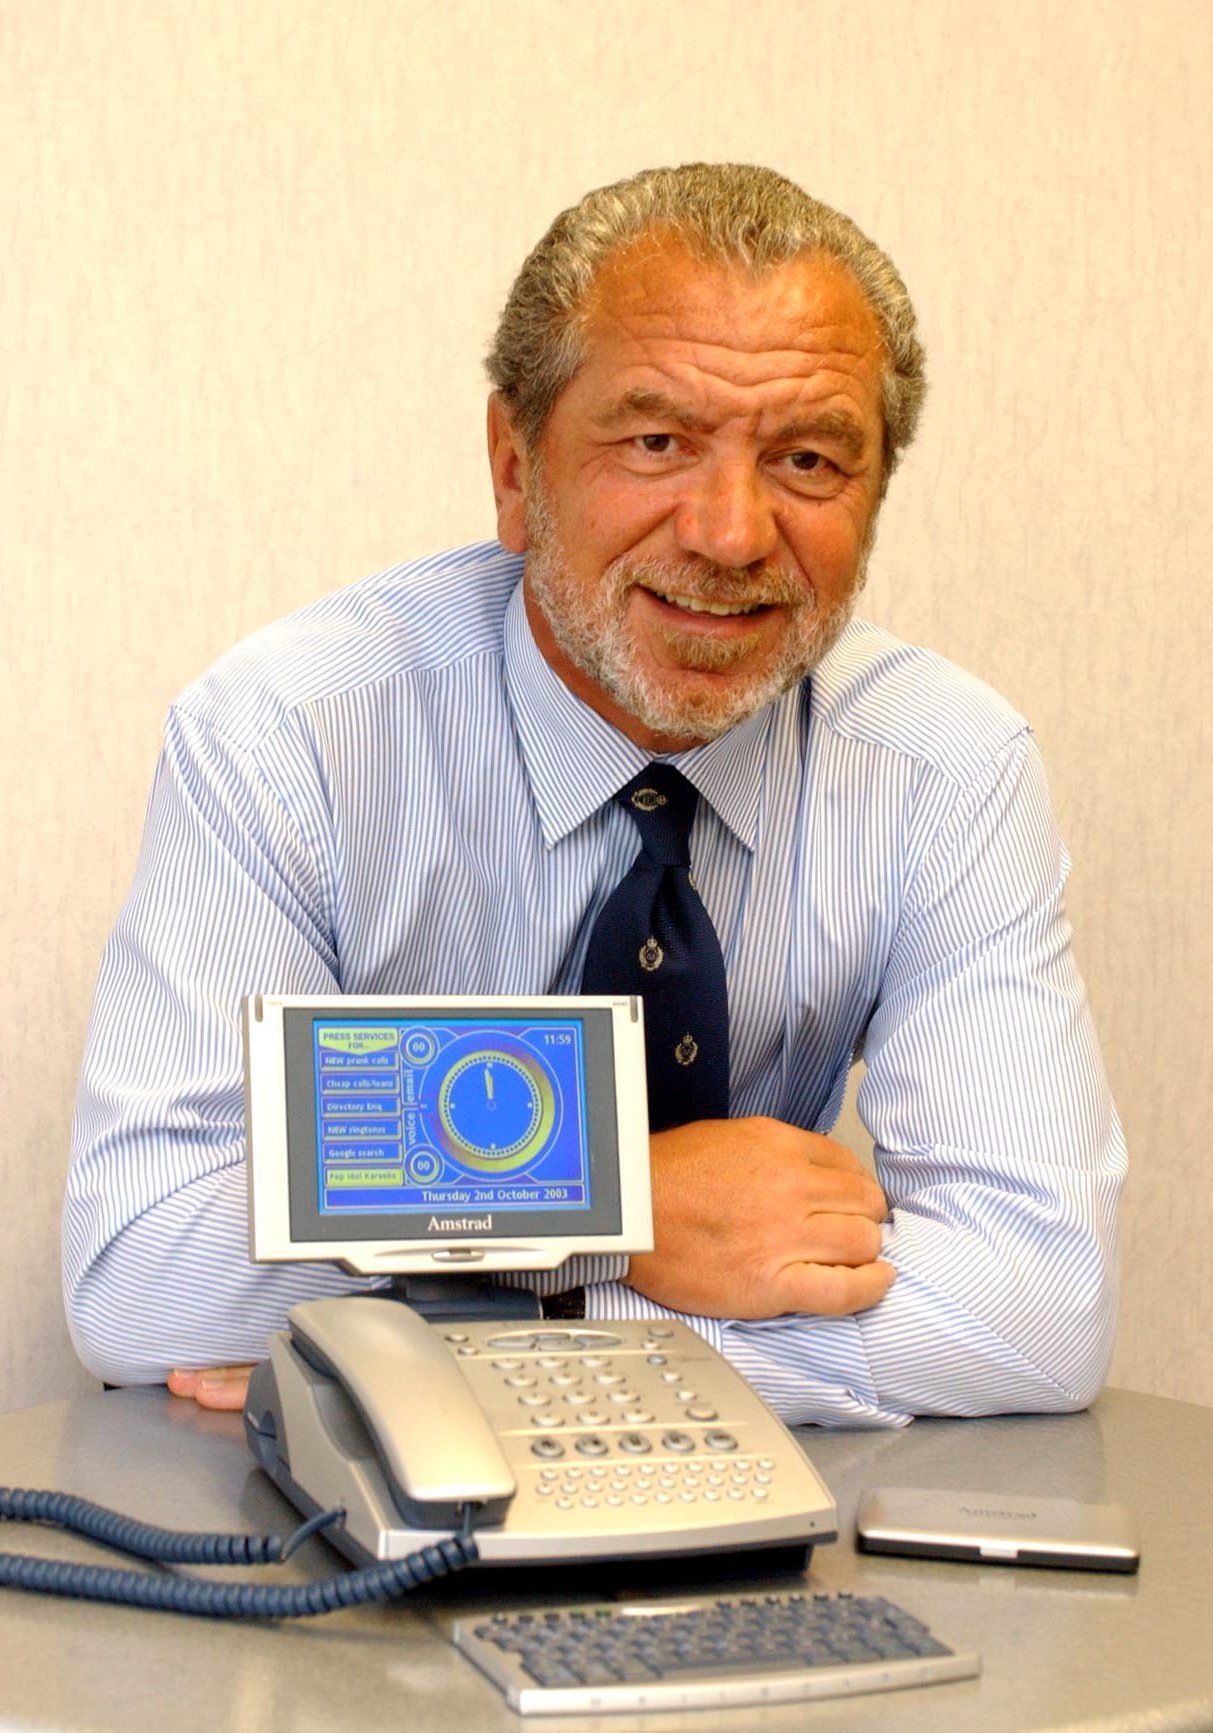 Alan Sugar boldly claims his Amstrad products are superior to Apple’s groundbreaking smartphones